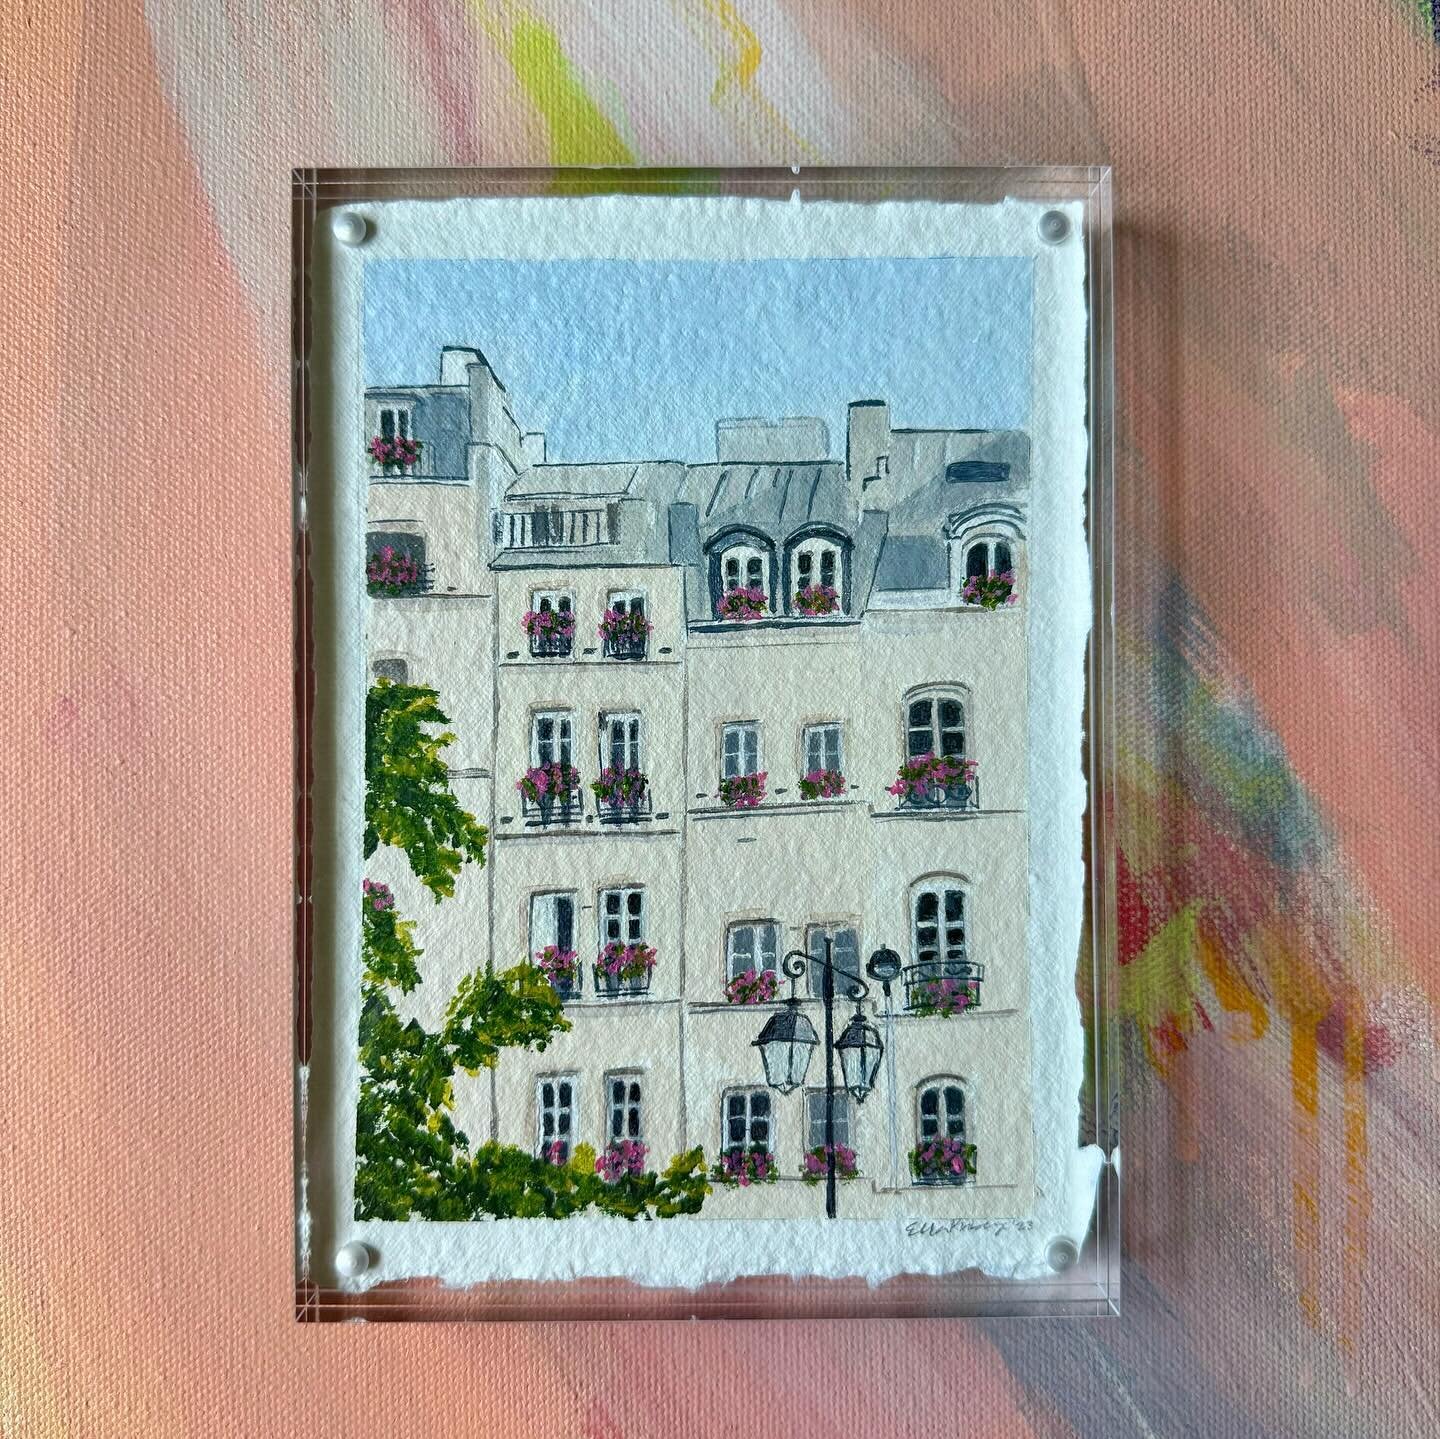 Have you found a favorite in the Scenes from Europe collection? I really love the little French building facade in the first photo, but I also love Cafe in Barecelona because these little squares and cafes were so wonderful for stopping for an aftern